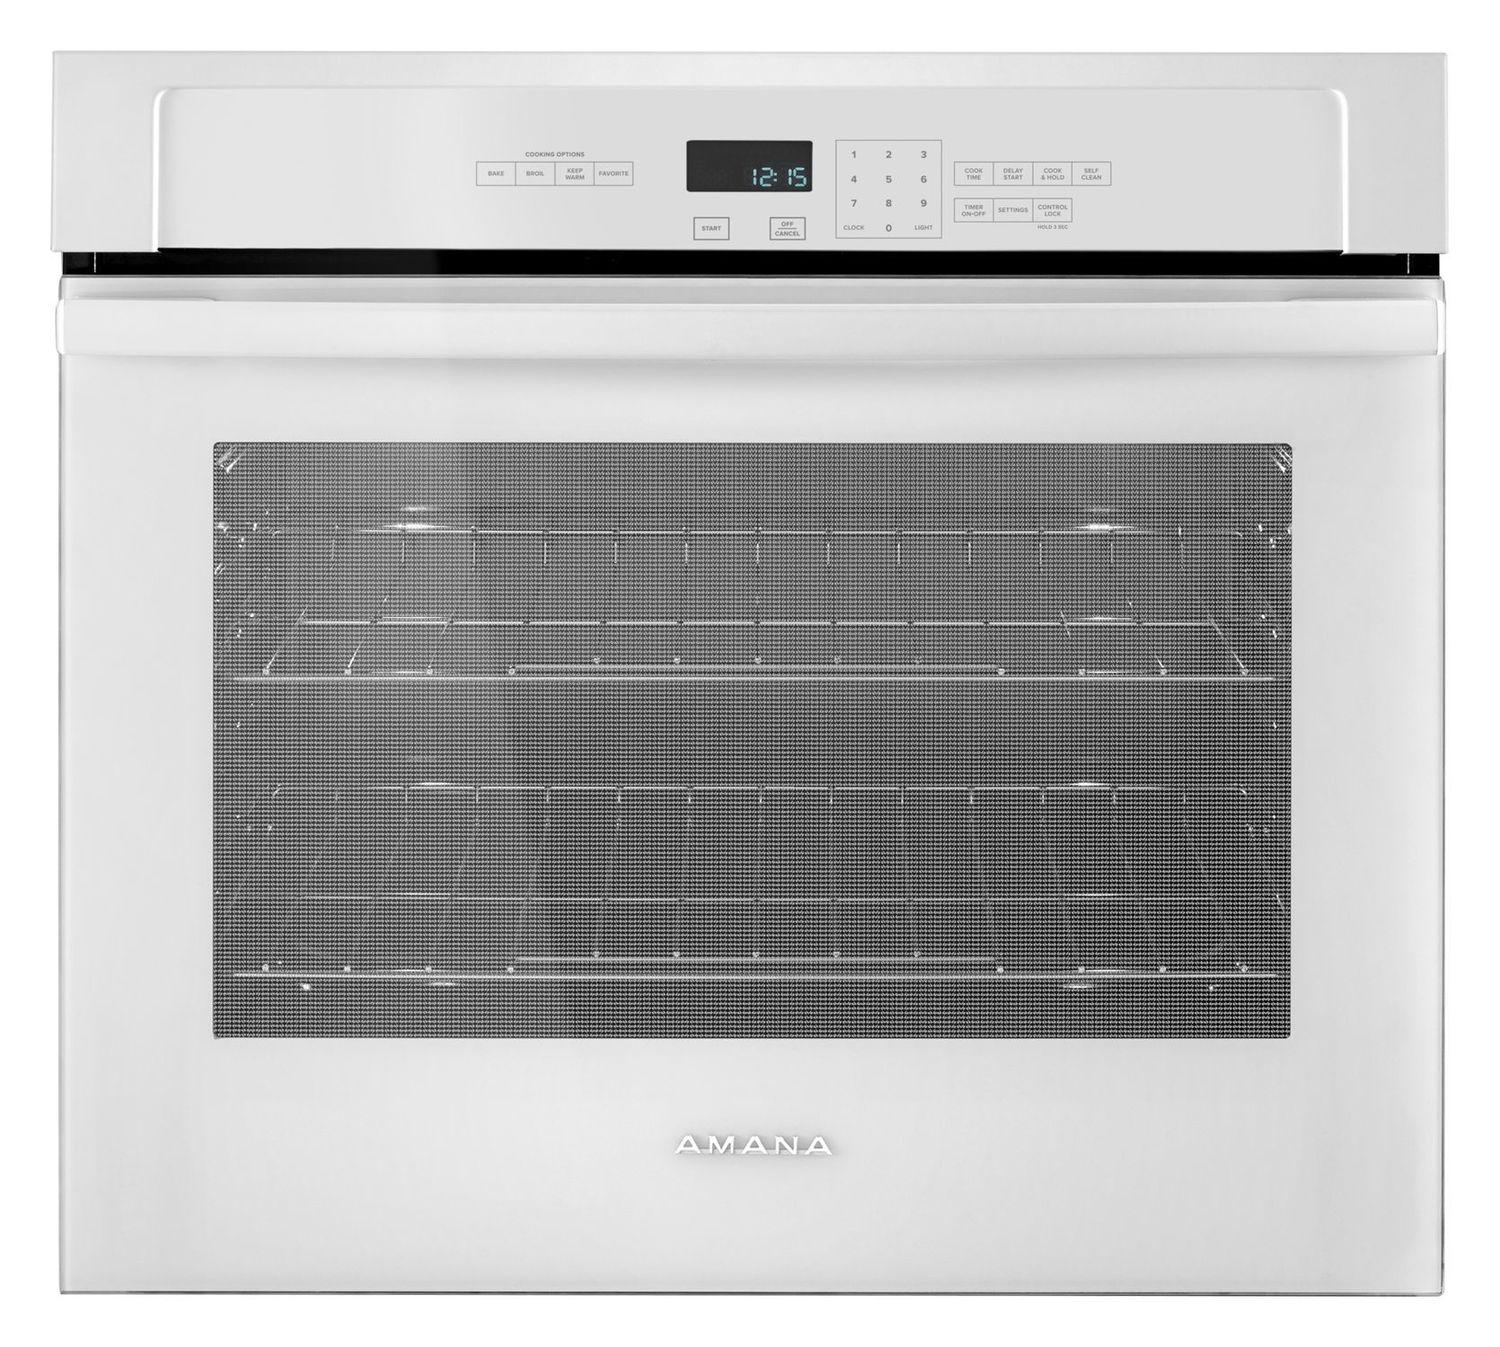 Amana 5.0 cu. ft. Thermal Wall Oven White